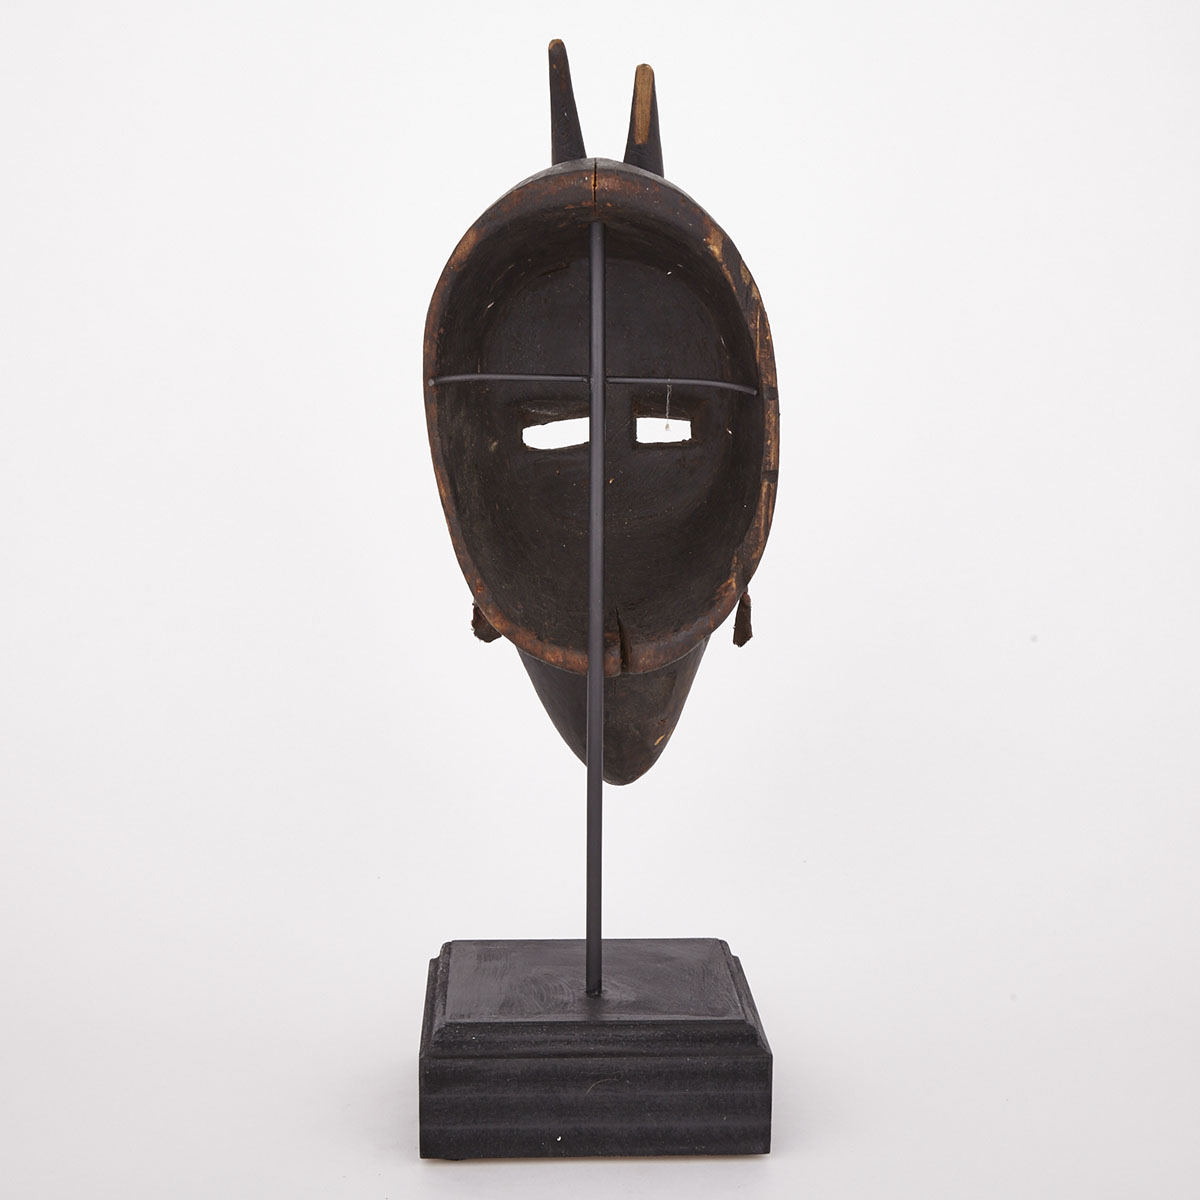 Marka Carved and Painted Wood Mask with copper and thread decoration, West Africa, 20th century